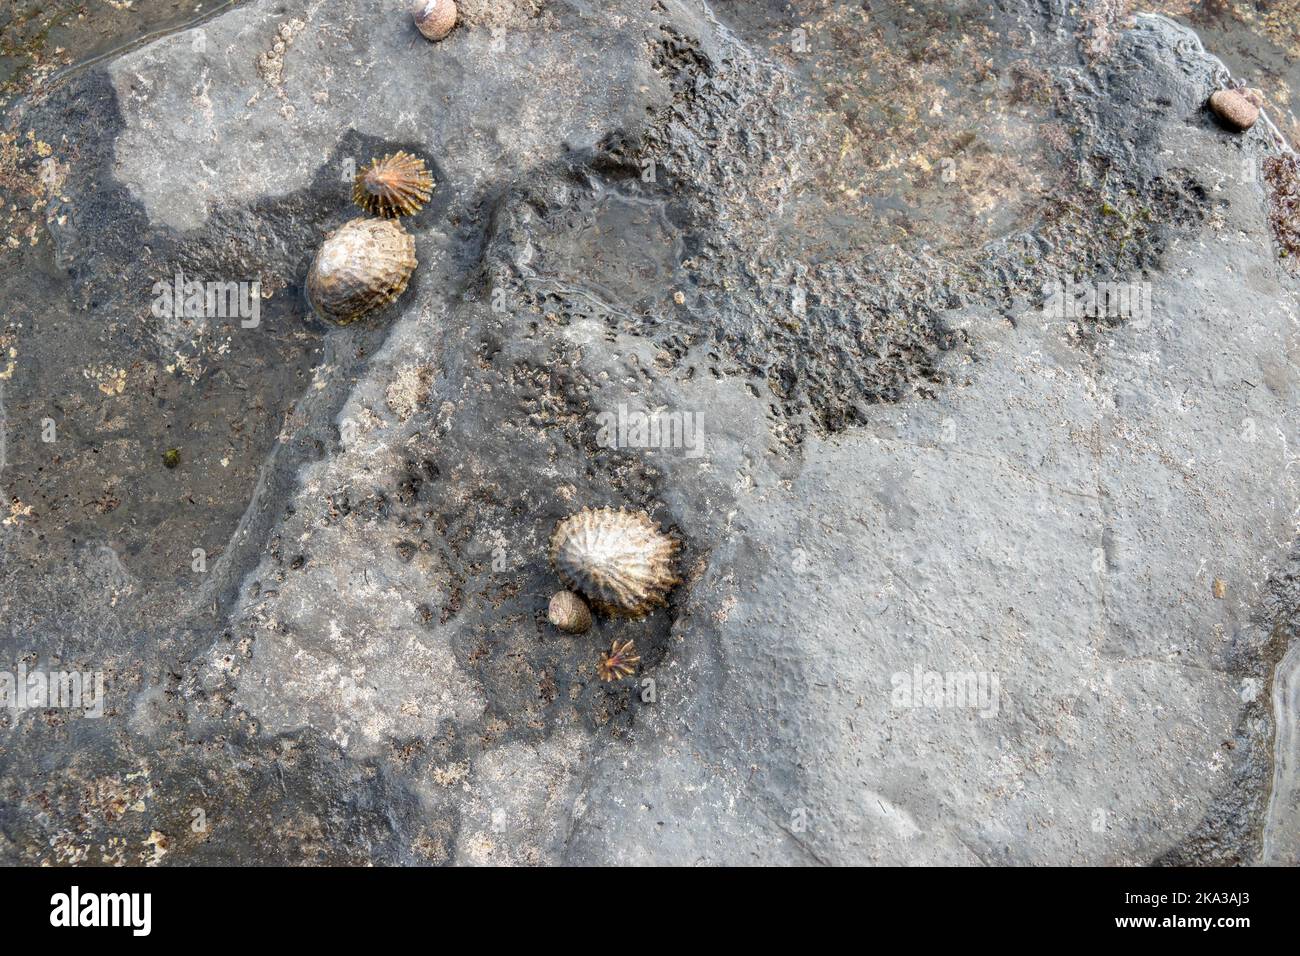 Limpets aquatic snails attached to a rock Stock Photo